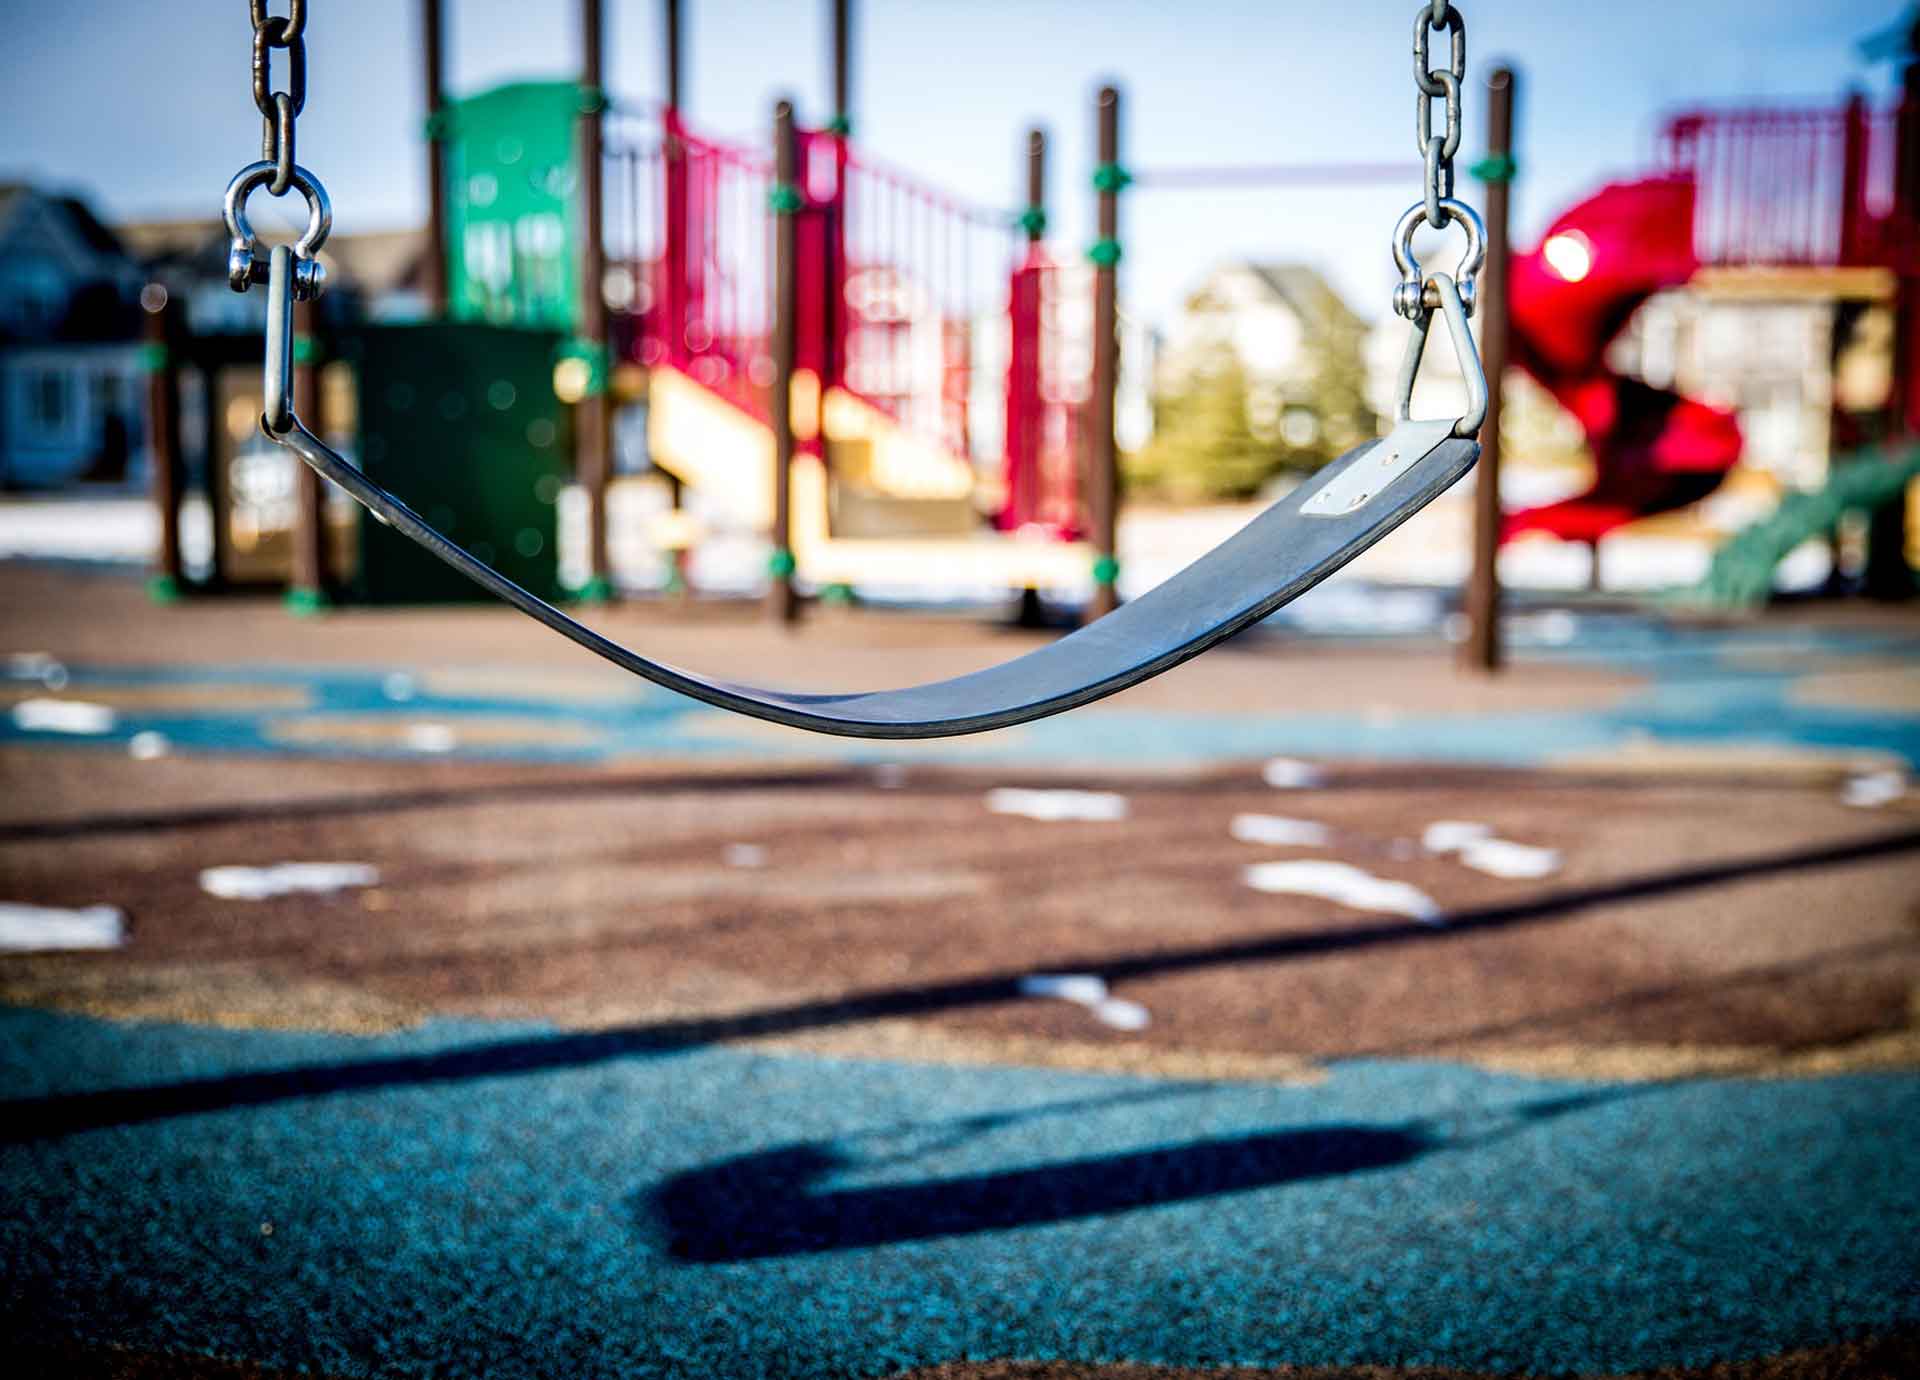 Playground Equipment Usage: What You Need to Know